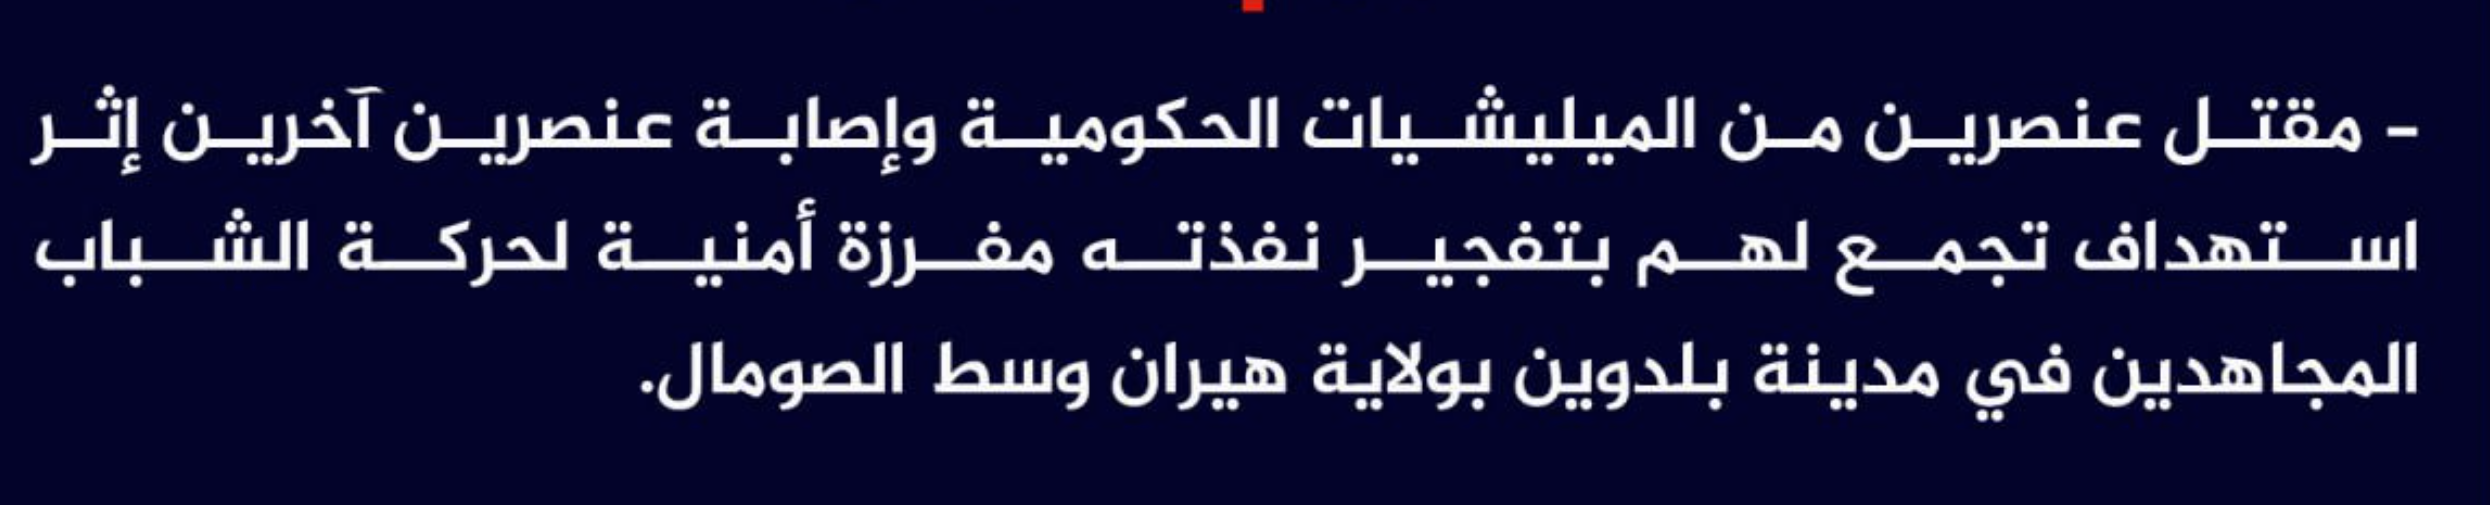 (Claim) al-Shabaab Killed Two Somalian Forces and Injured Two Others in an IED Attack on Their Gathering in Baldawin City, Hiran State, Somalia - 8 March 2023